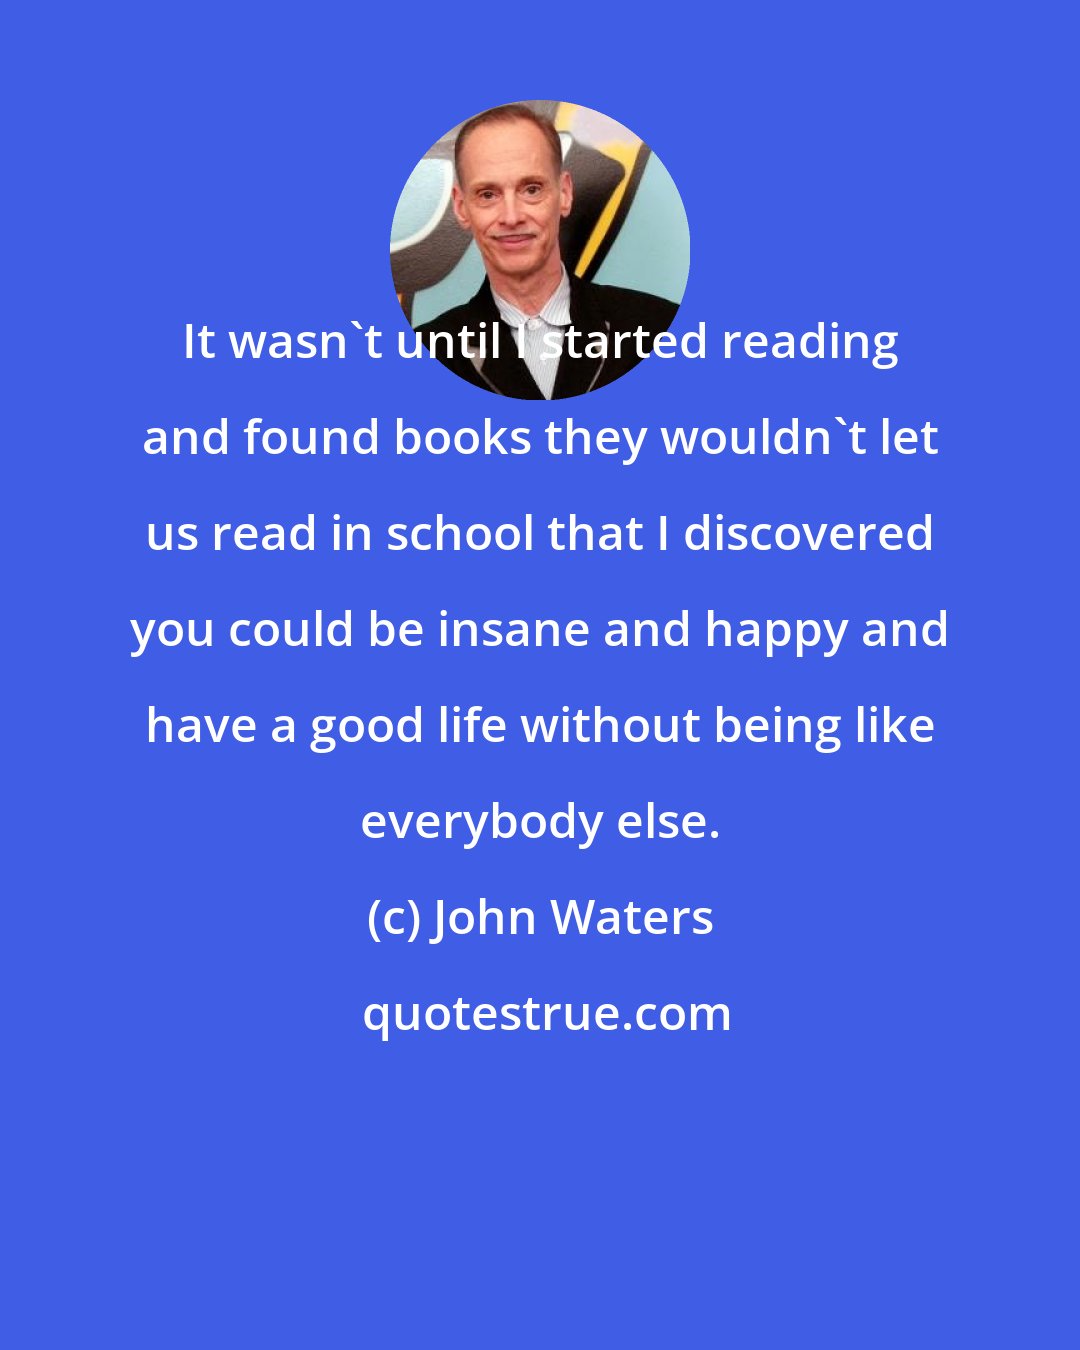 John Waters: It wasn't until I started reading and found books they wouldn't let us read in school that I discovered you could be insane and happy and have a good life without being like everybody else.